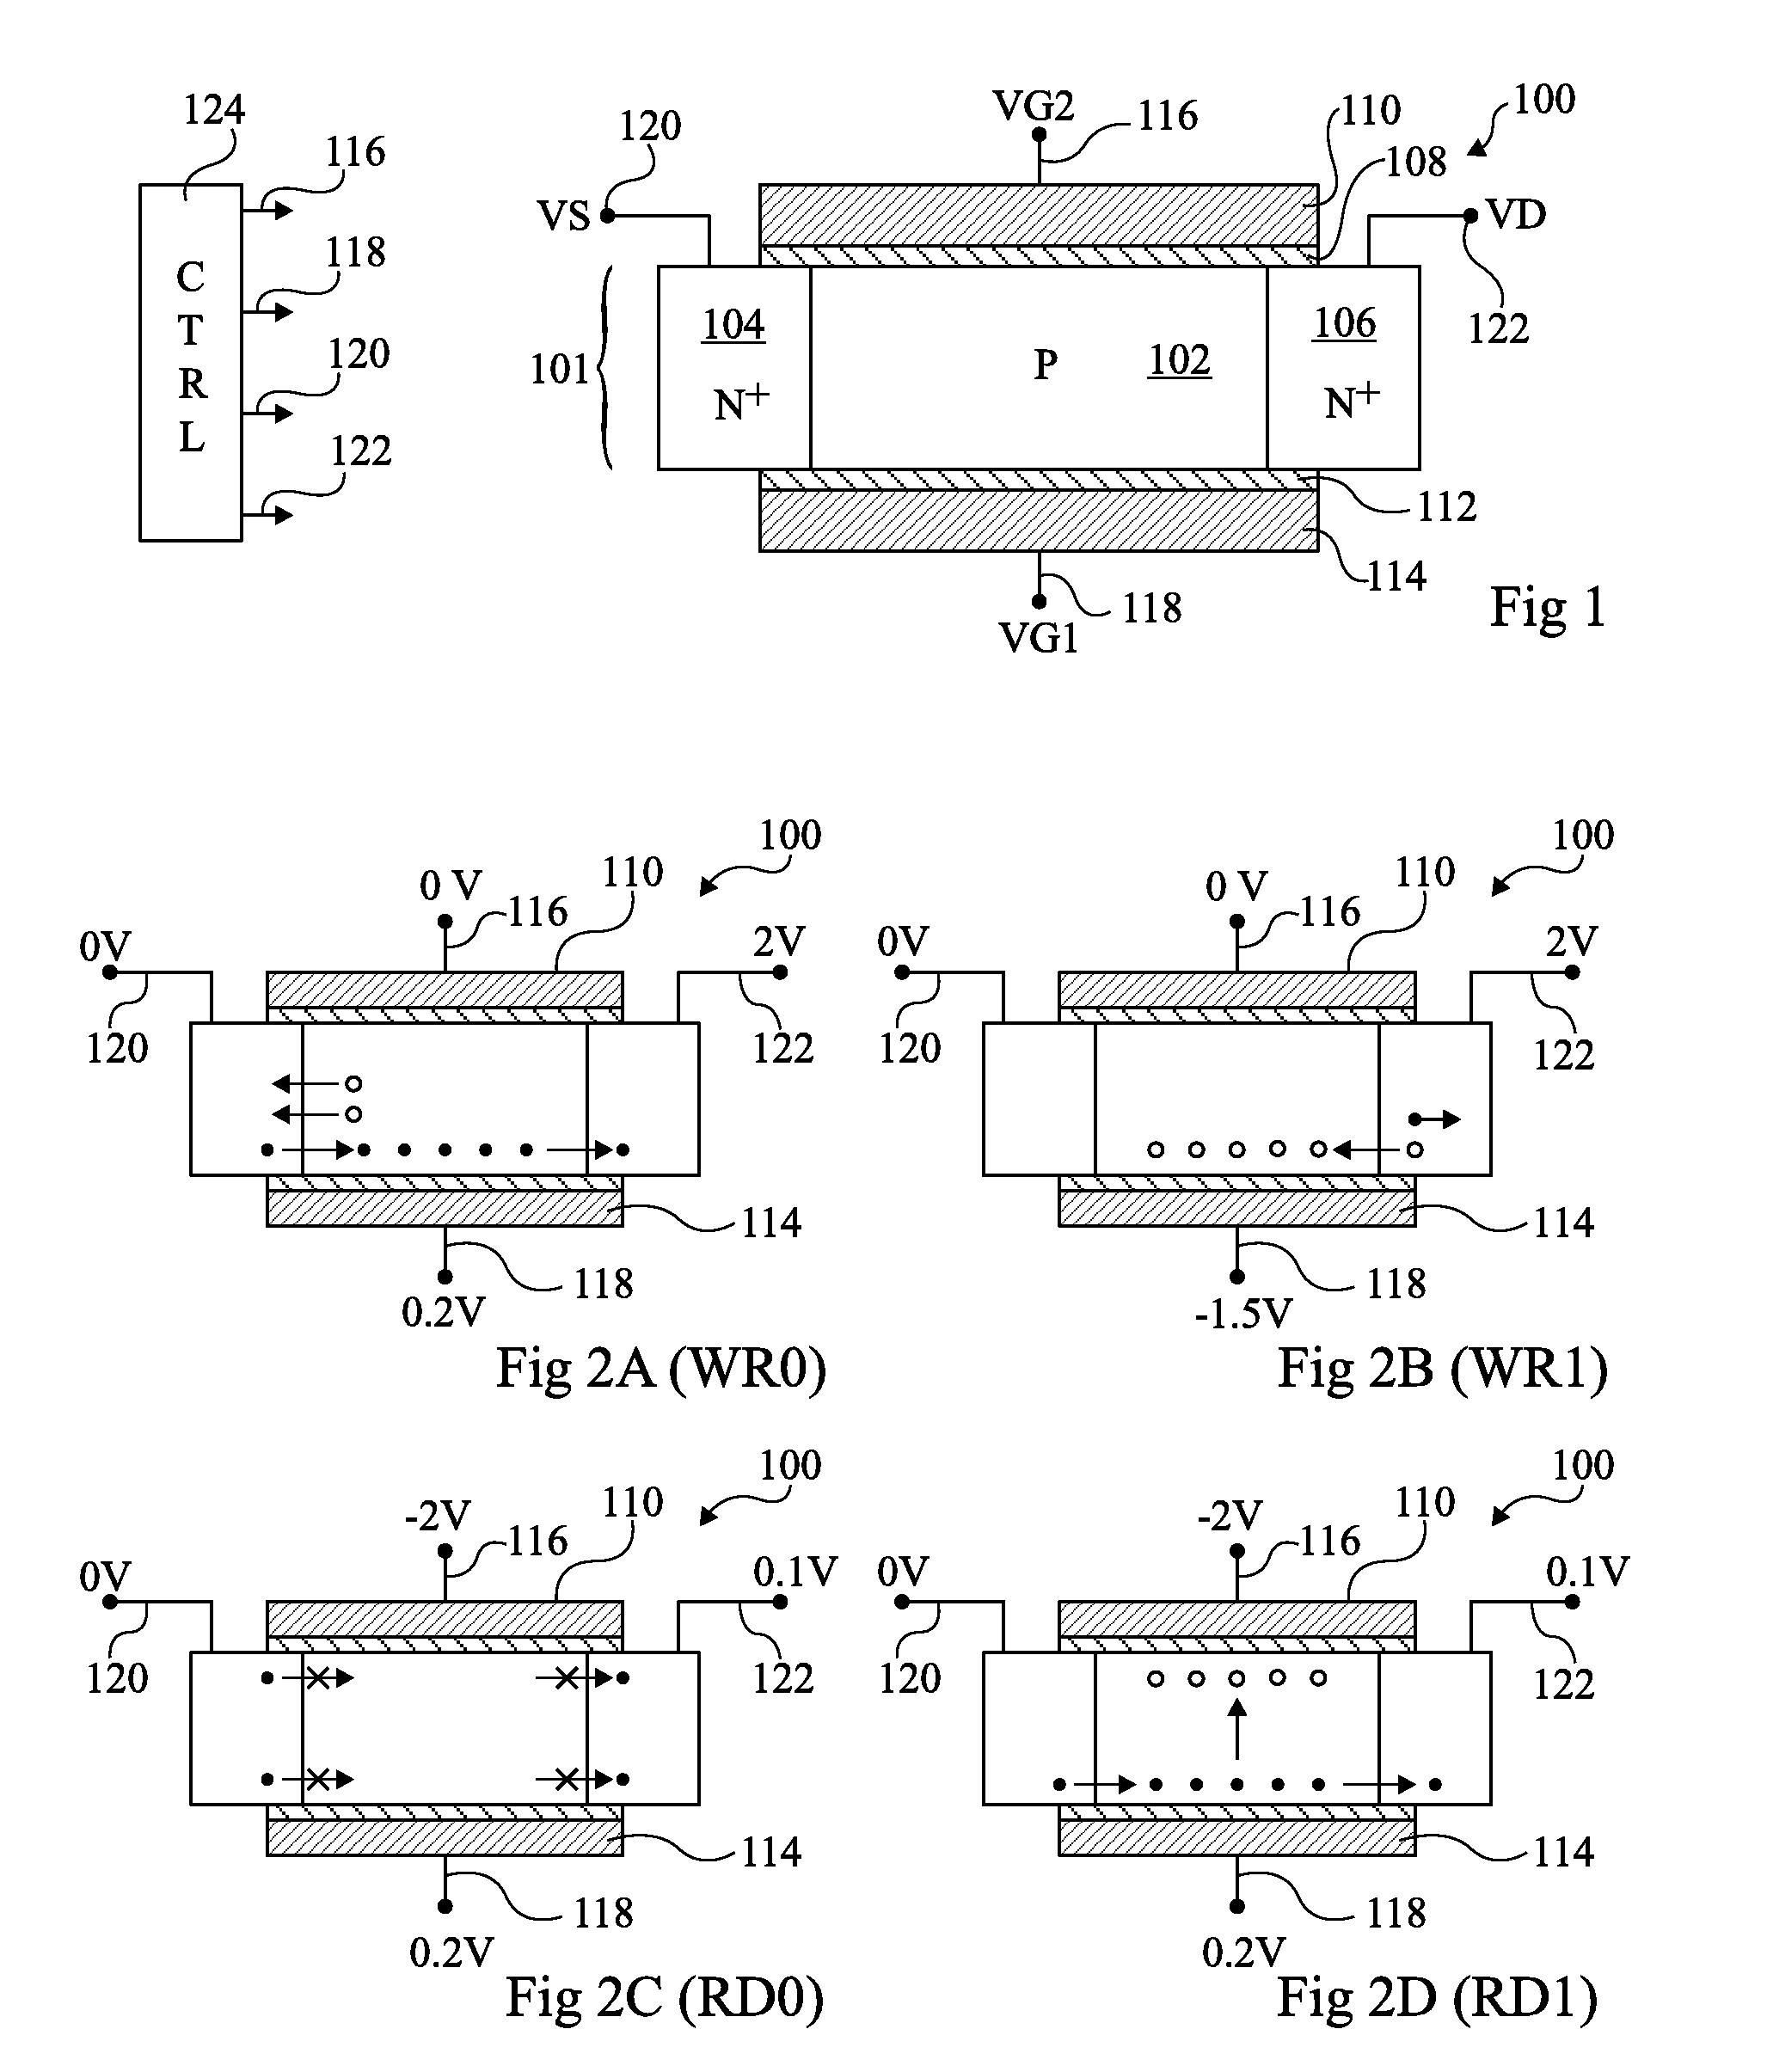 Double-gate floating-body memory device